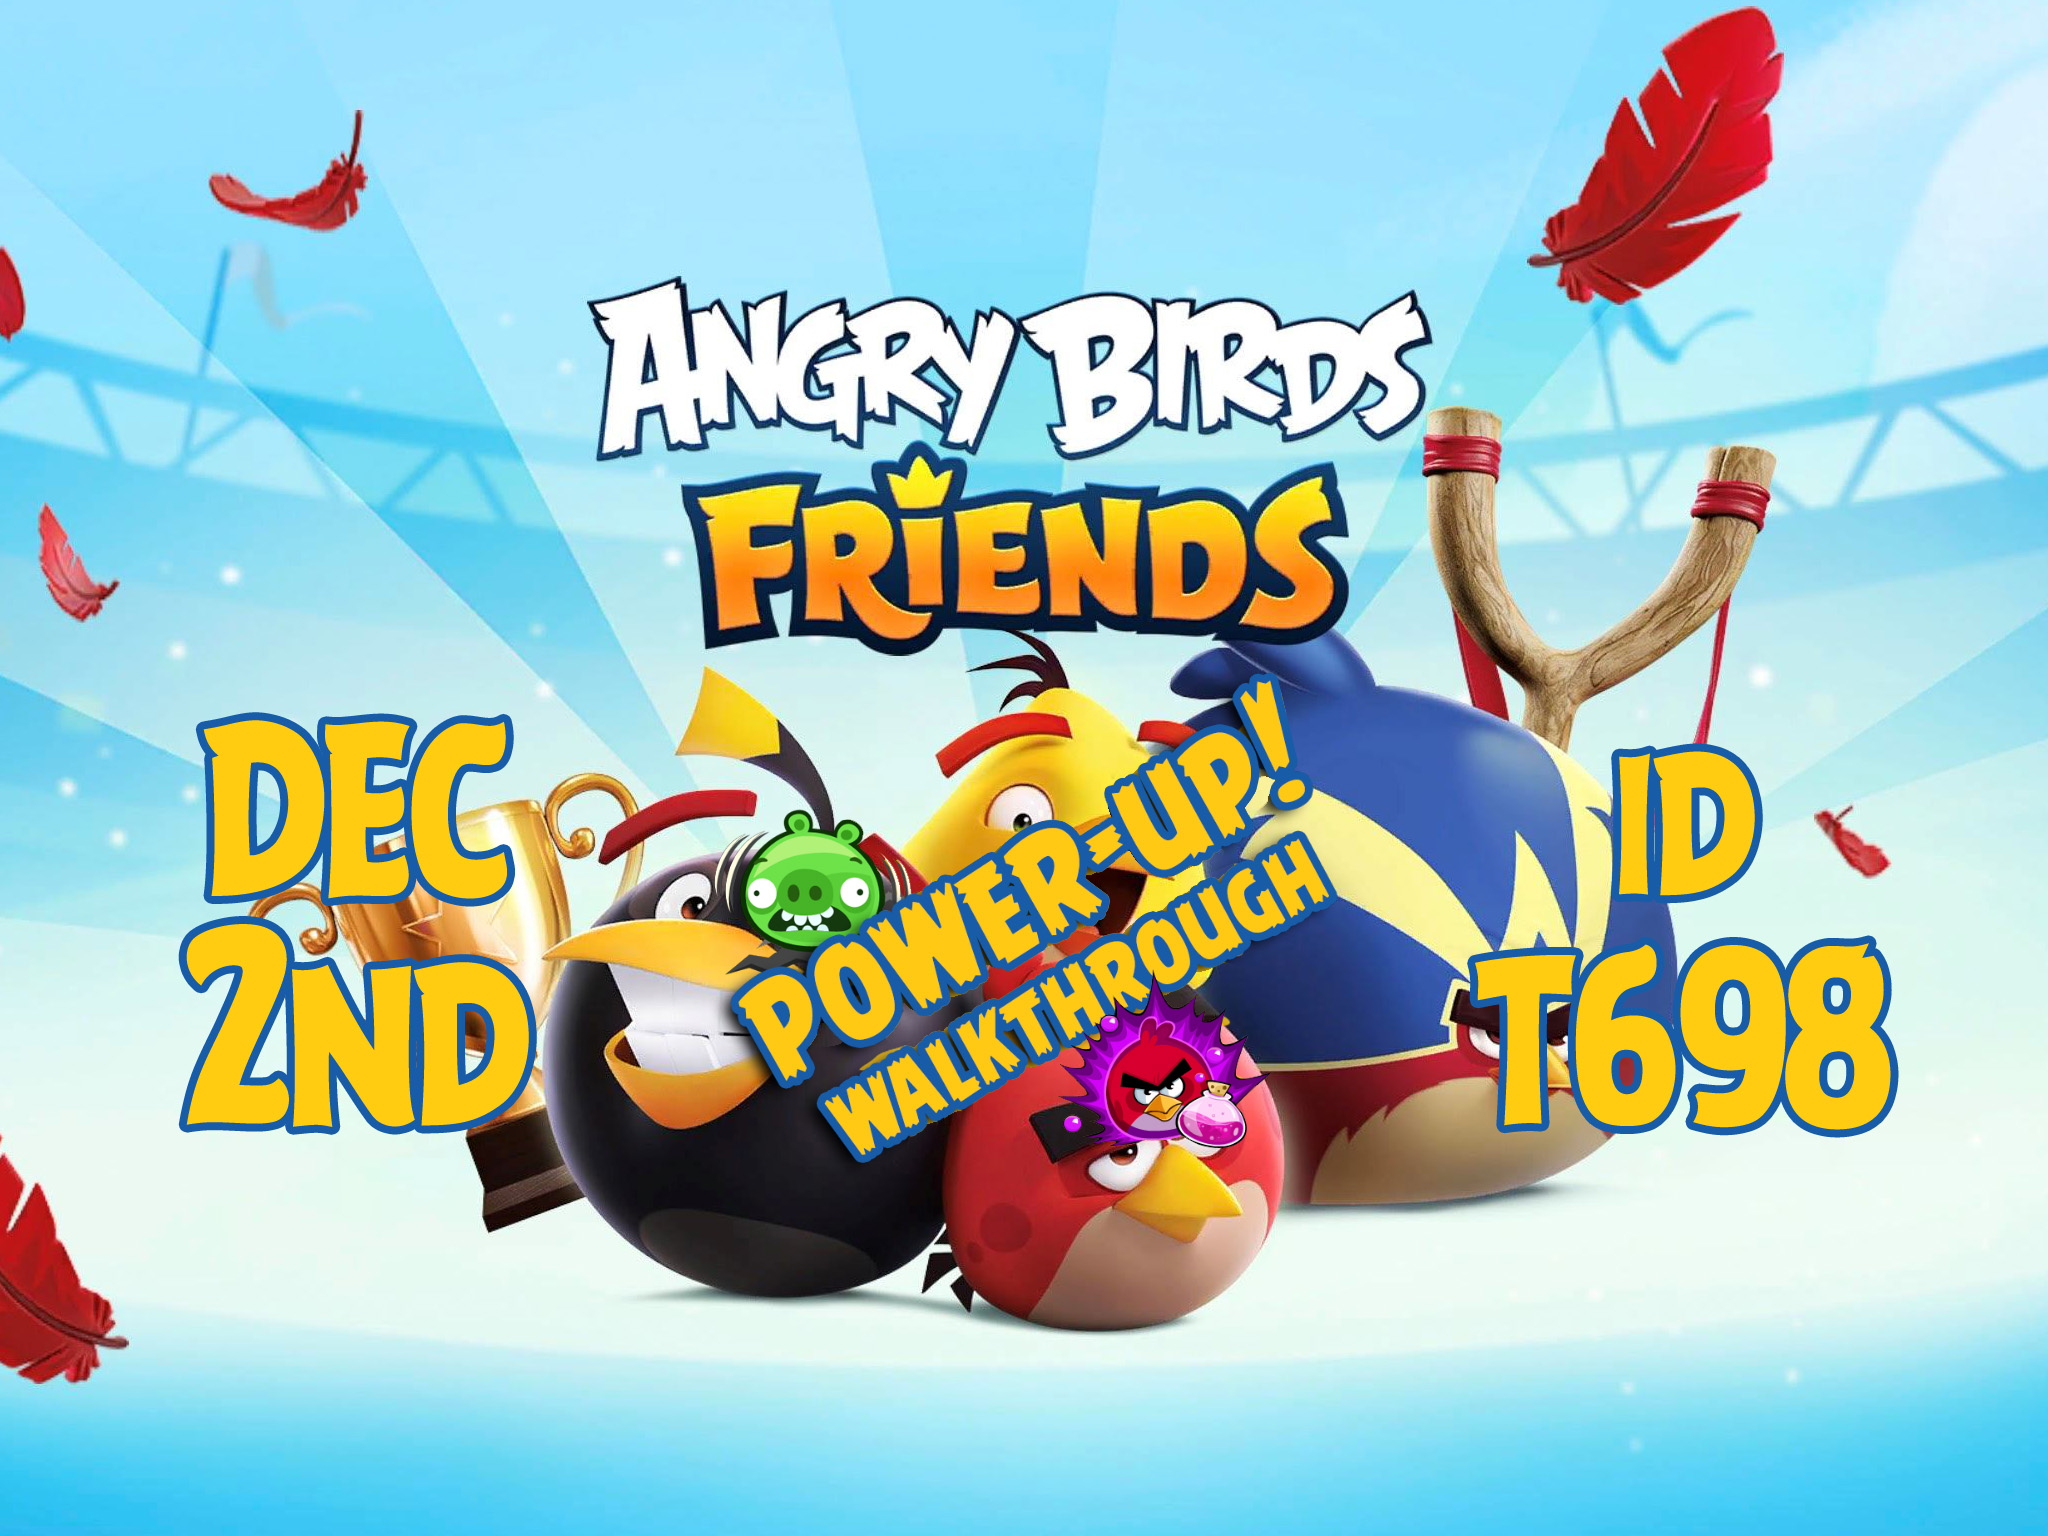 Angry-Birds-Friends-Tournament-T698-Feature-Image-PU